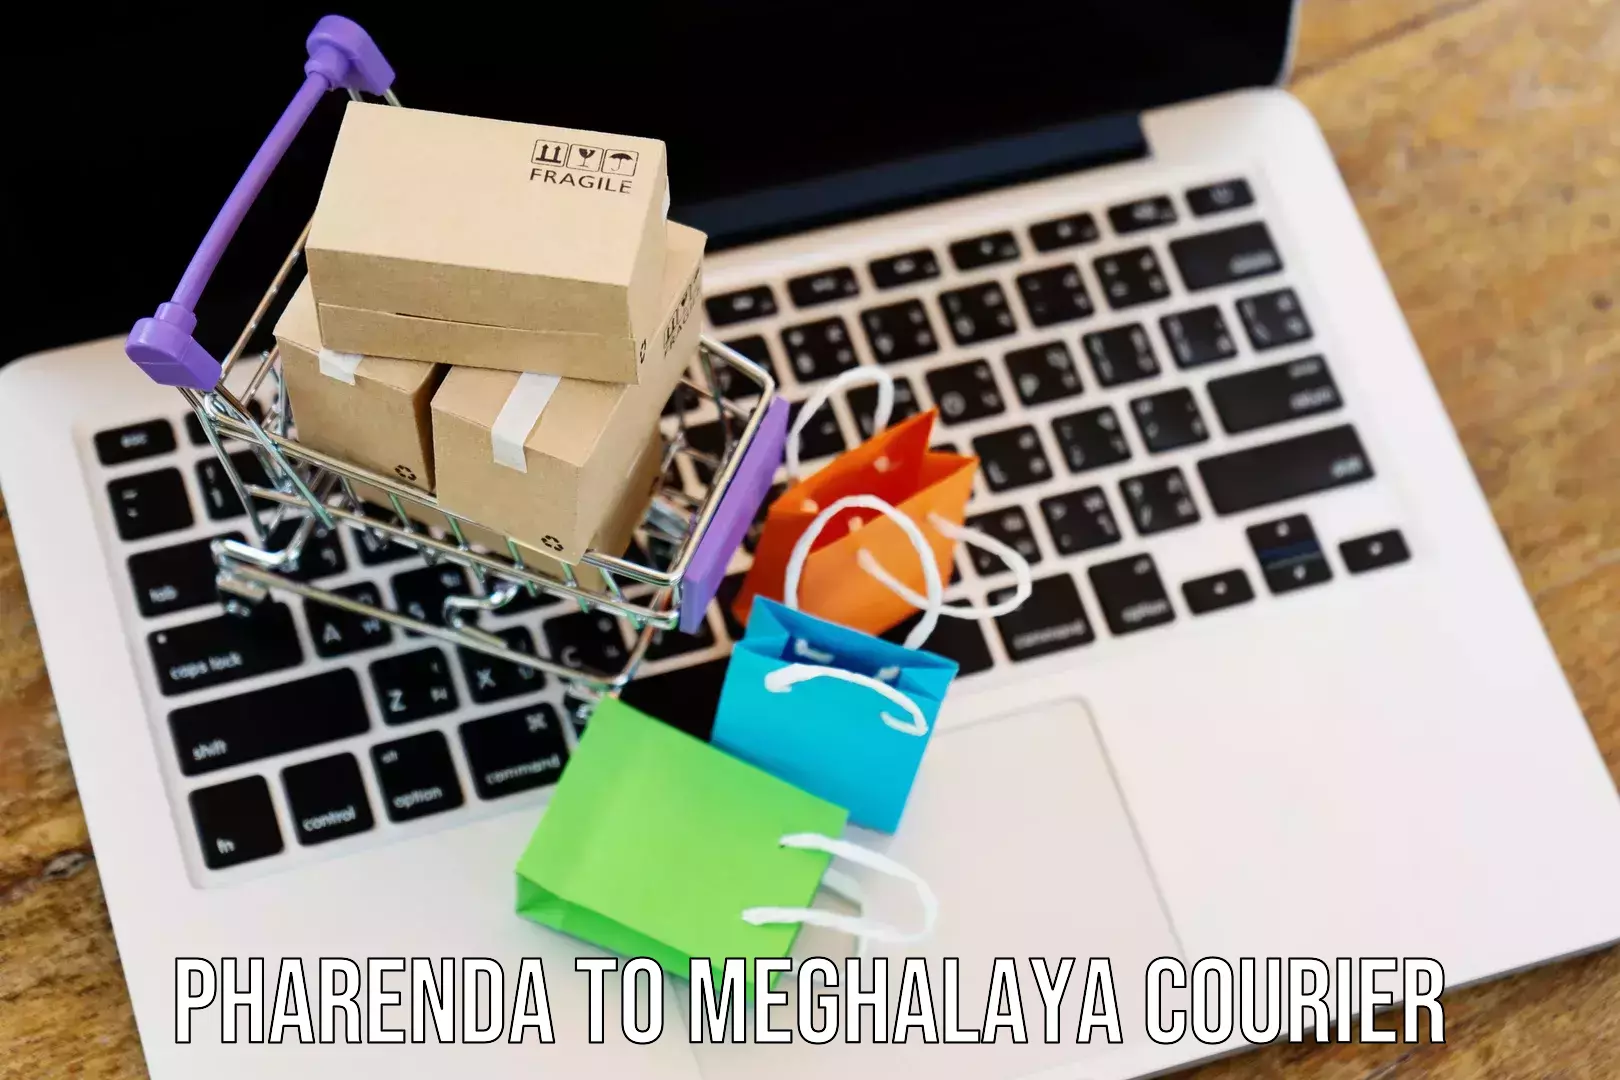 Easy access courier services Pharenda to Meghalaya